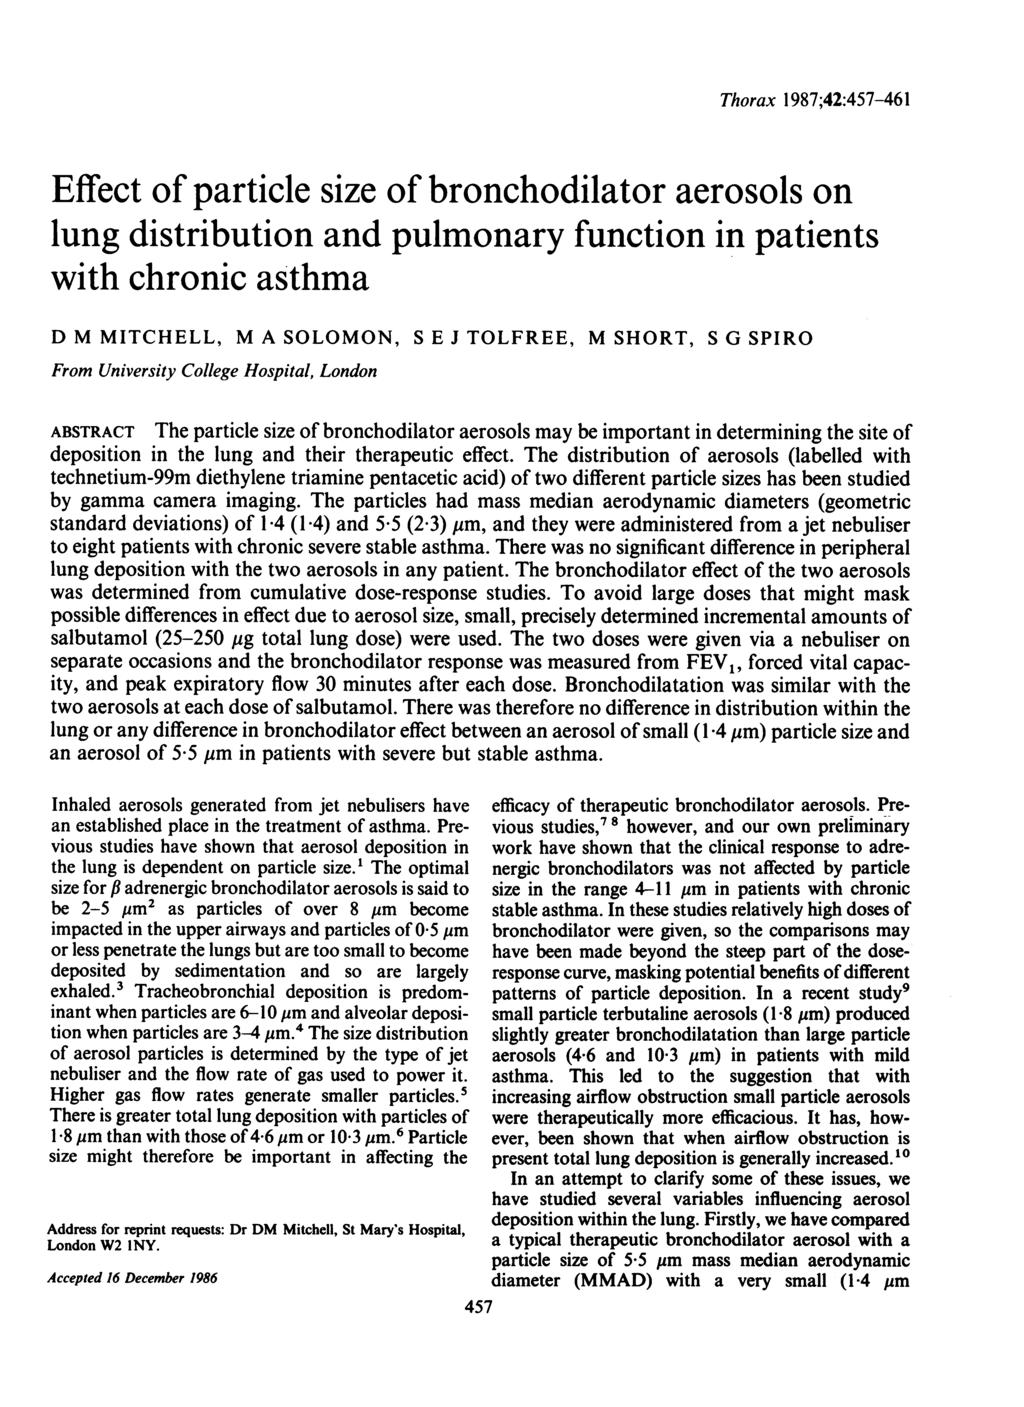 Thorax 1987;42:457-461 Effect of particle size of bronchodilator aerosols on lung distribution and pulmonary function in patients with chronic asthma D M MITCHELL, M A SOLOMON, S E J TOLFREE, M